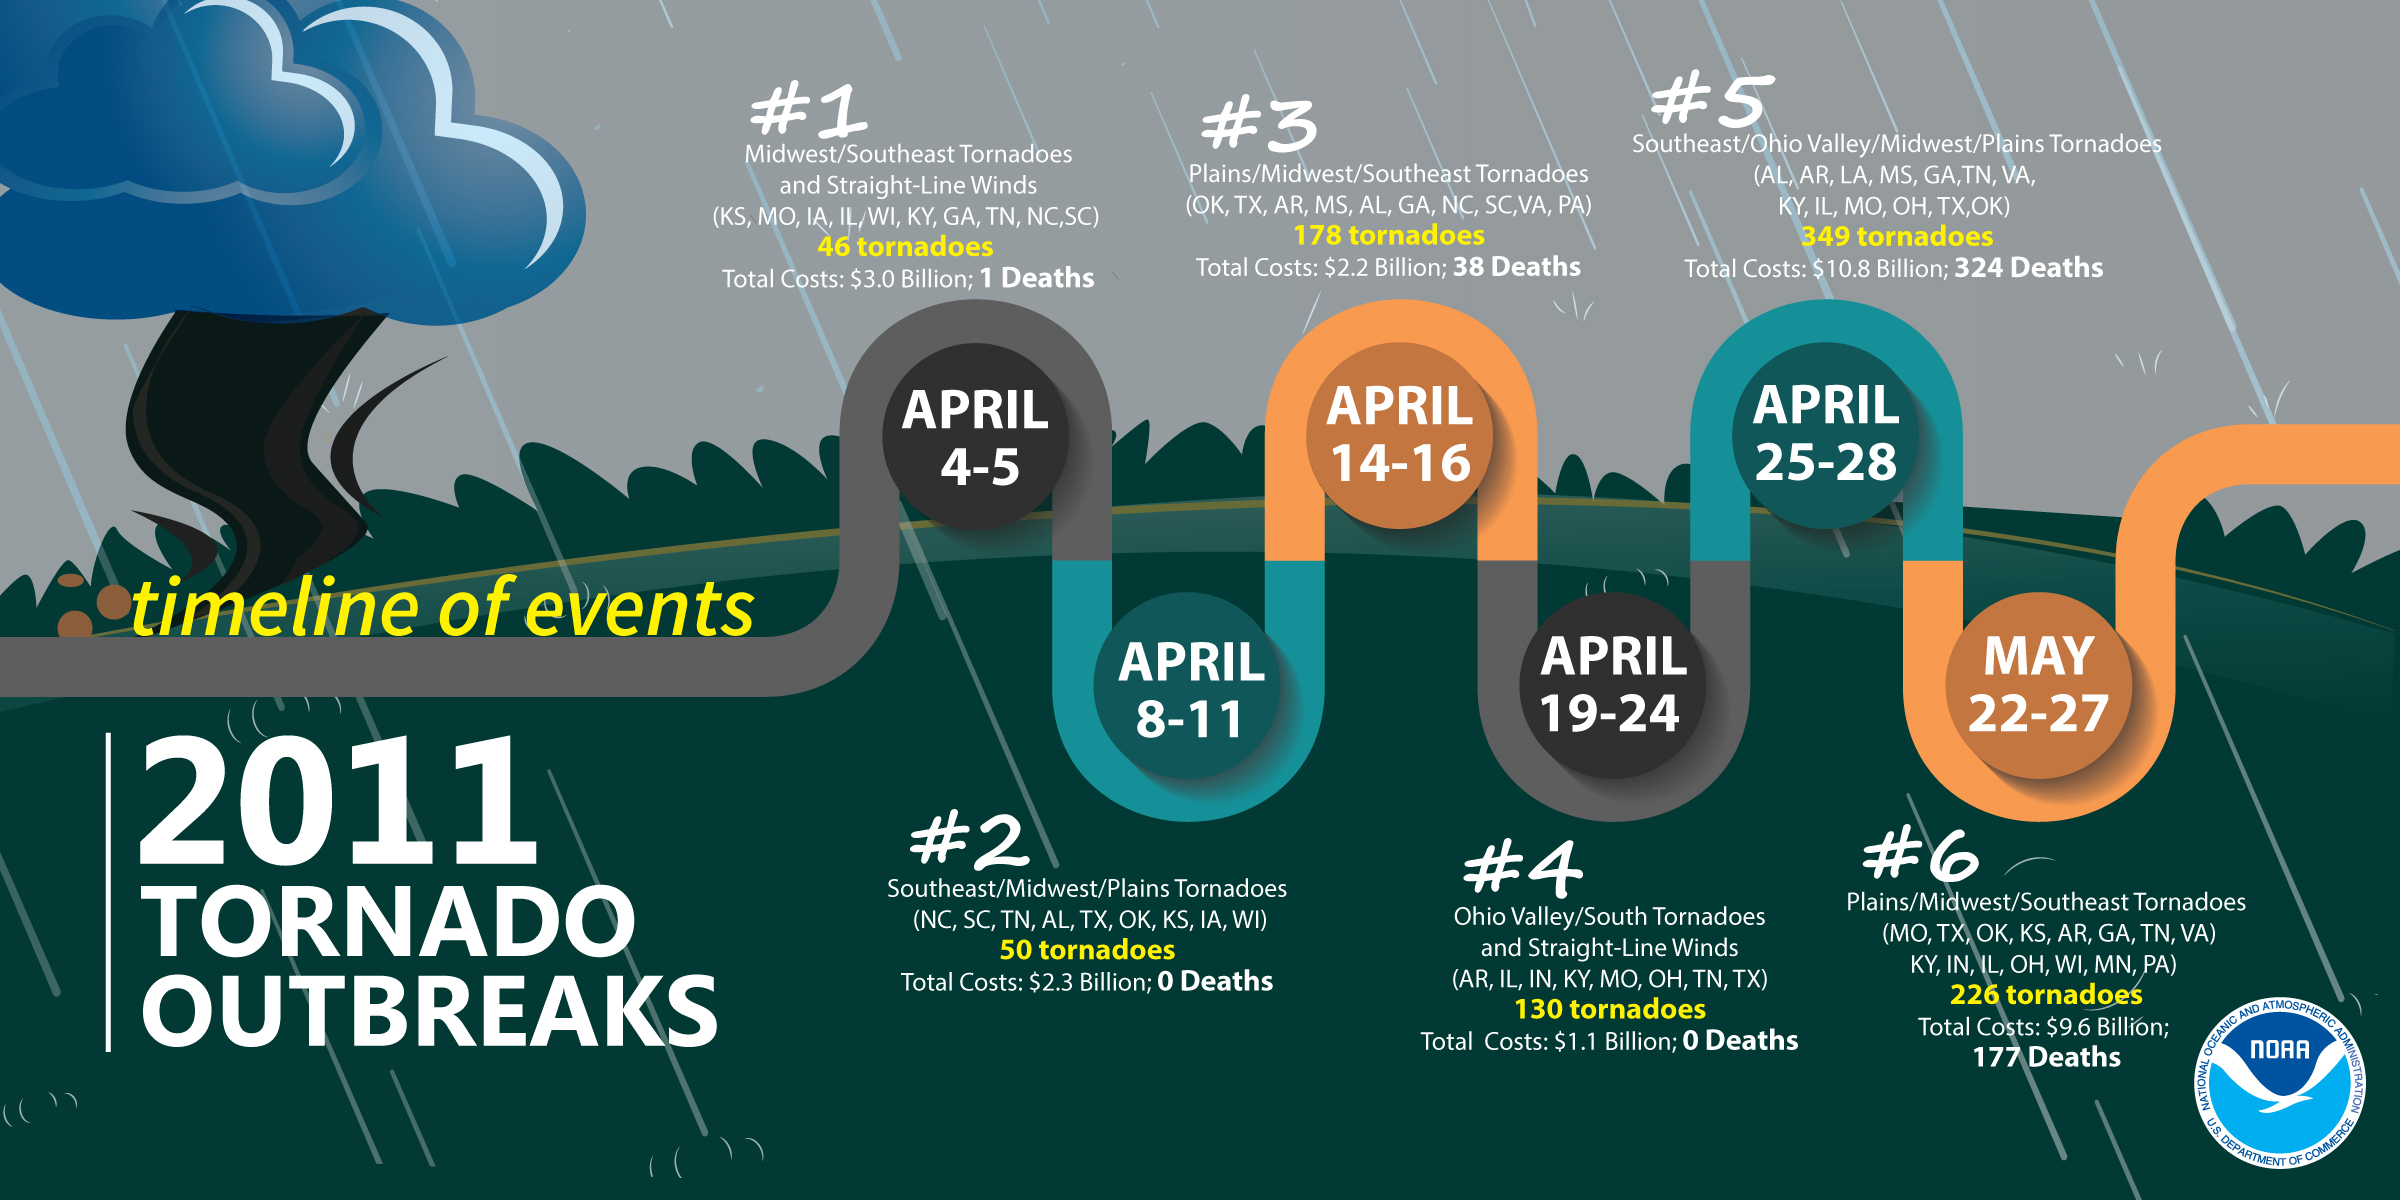 2011 Tornado Outbreaks - timeline of events:#1 April 4-5: Midwest/Southeast Tornadoes and Straight-Line Winds (KS, MO, IA, IL, WI, KY, GA, TN, NC, SC) - 46 tornadoes / Total costs: $3.0 Billion; 1 Death#2 April 8-11: Southeast/Midwest/Plains Tornadoes (NC, SC, TN, AL, TX, OK, KS, IA, WI) - 50 tornadoes / Total costs: $2.3 Billion; 0 Deaths#3 April 14-16: Plains/Midwest/Southeast Tornadoes (OK, TX, AR, MS, AL, GA, NC, SC, VA, PA) - 178 tornadoes / Total costs: $2.2 Billion; 38 Deaths#4 April 19-24: Ohio Valley/South Tornadoes and Straight-Line Winds (AR, IL, IN, KY, MO, OH, TN, TX) - 130 tornadoes / Total costs: $1.1 Billion; 0 Deaths#5 April 25-28: Southeast/Ohio Valley/Midwest/Plains Tornadoes (AL, AR, LA, MS, GA, TN, VA, KY, IL, MO, OH, TX, OK) - 349 tornadoes / Total costs: $10.8 Billion; 324 Deaths#6 May 22-27: Plains/Midwest/Southeast Tornadoes (MO, TX, OK, KS, AR, GA, TN, VA, KY, IN, IL, OH, WI, MN, PA) - 226 tornadoes / Total costs: $9.6 Billion; 177 Deaths